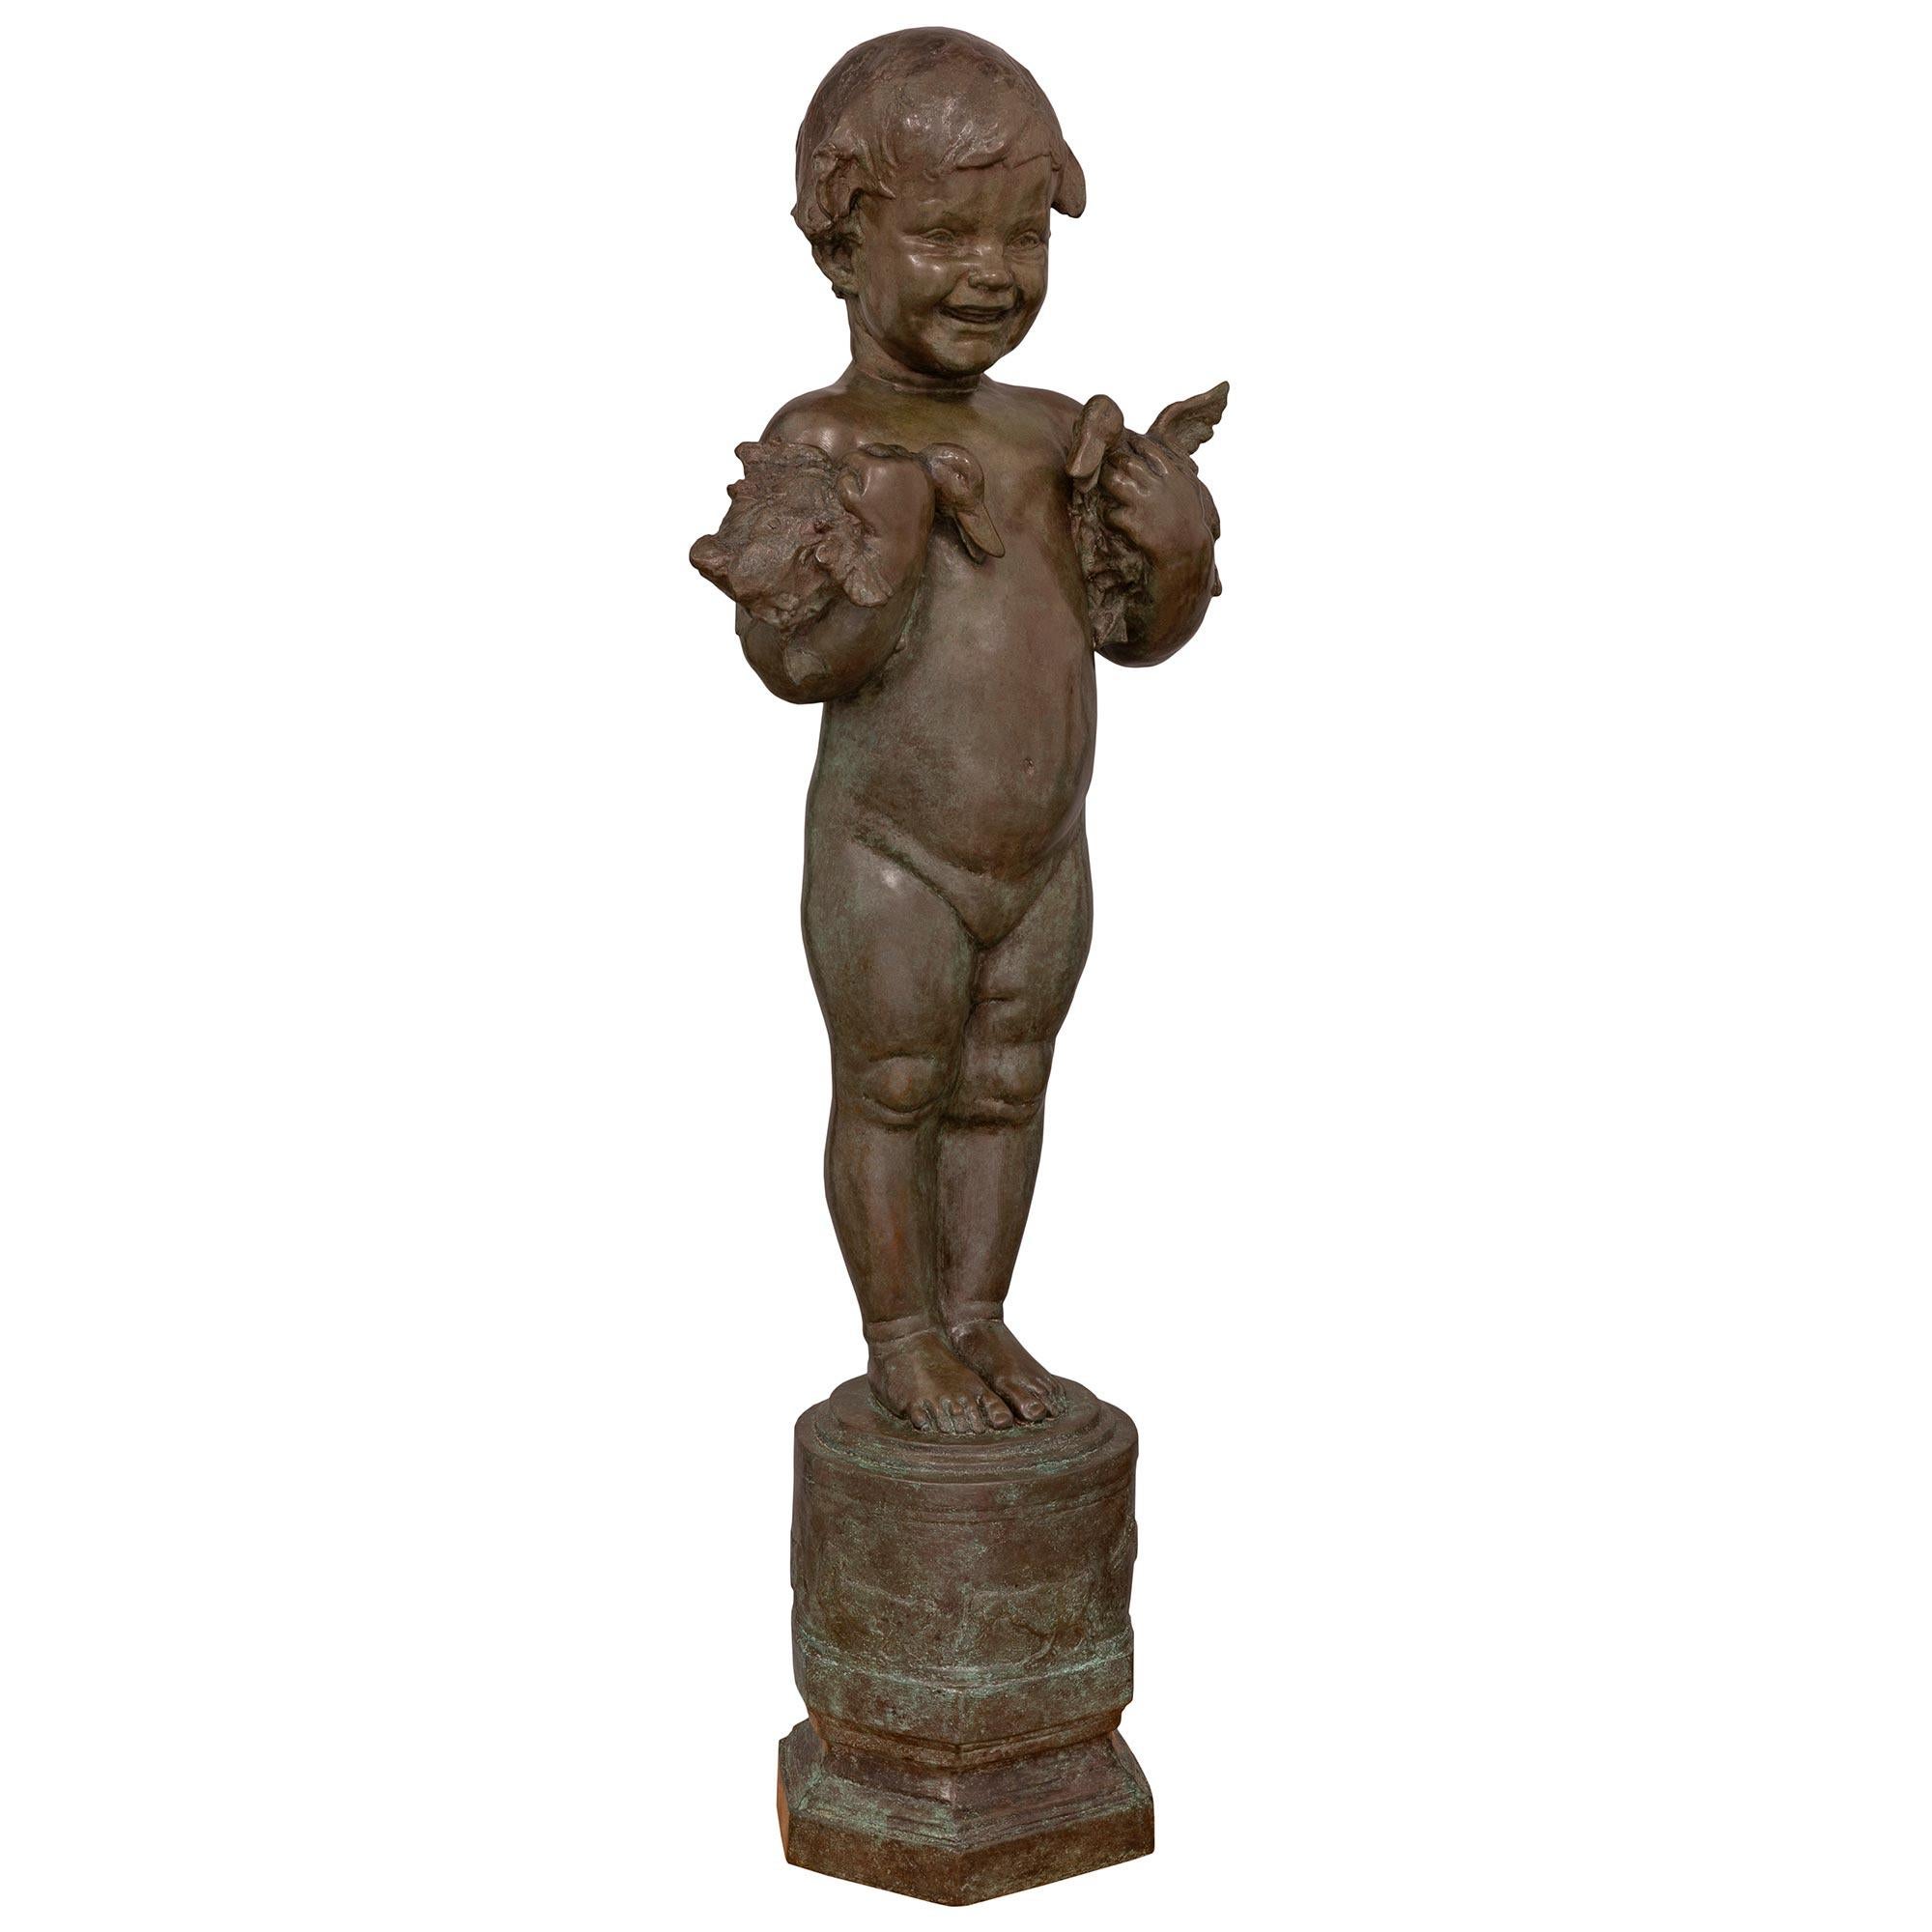 A sensational and most charming American turn of the century patinated bronze statue of 'Duck Baby', signed Edith Barretto Parsons E.G.F., I.C. The bronze is raised by a hexagonal mottled base with a wrap around design with ducks. Above, the